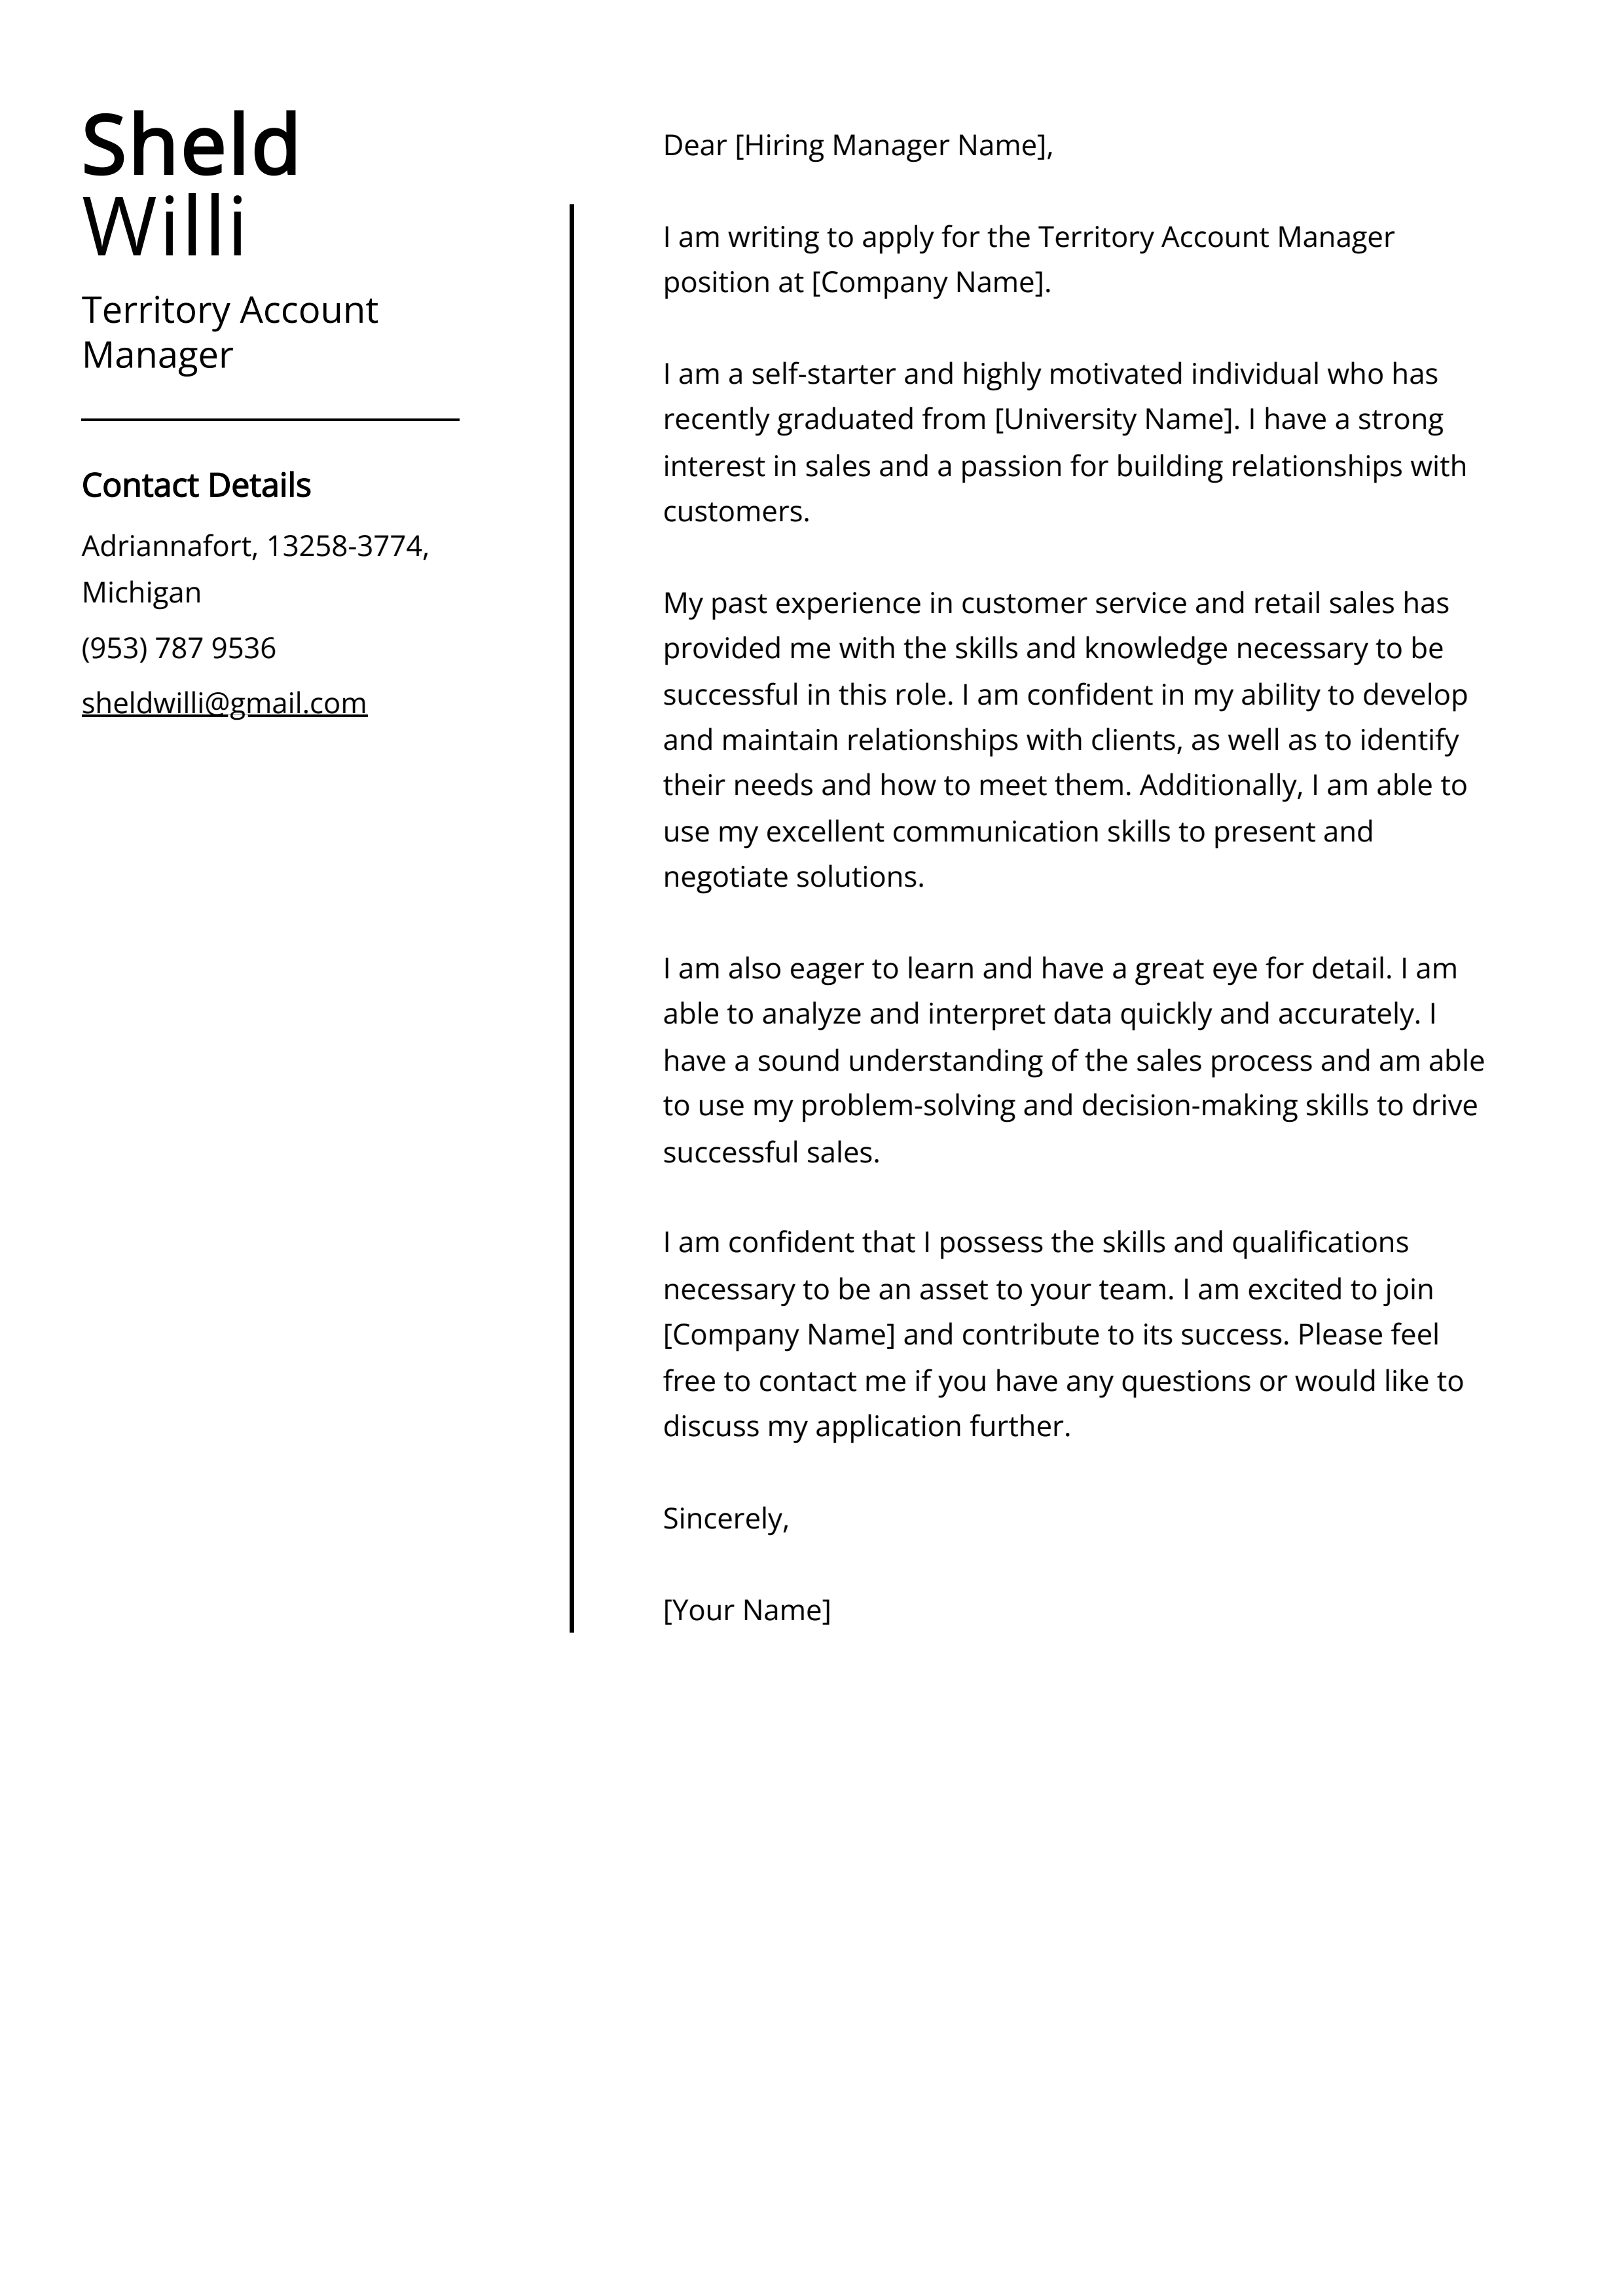 Territory Account Manager Cover Letter Example